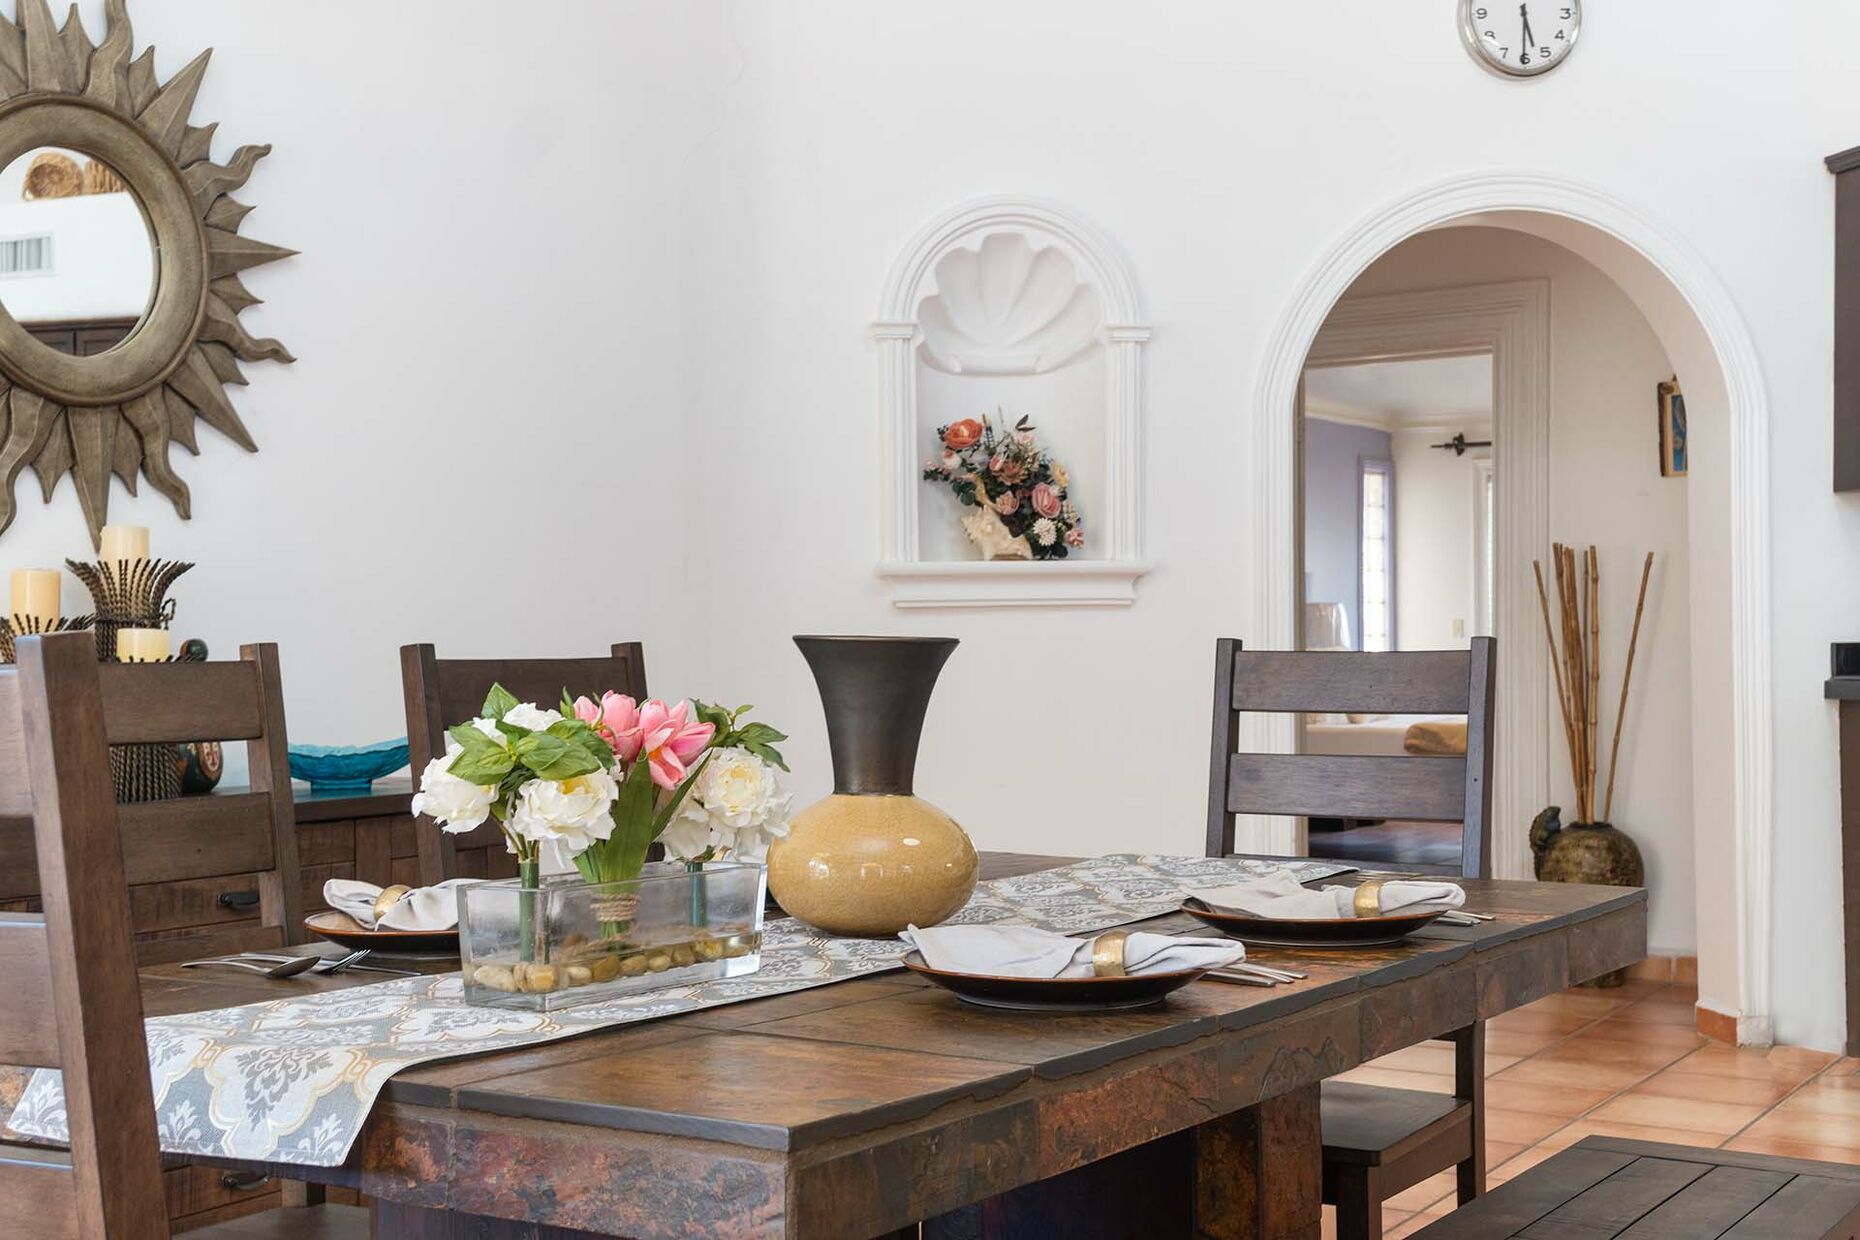 a rustic dining table invites you and your guests